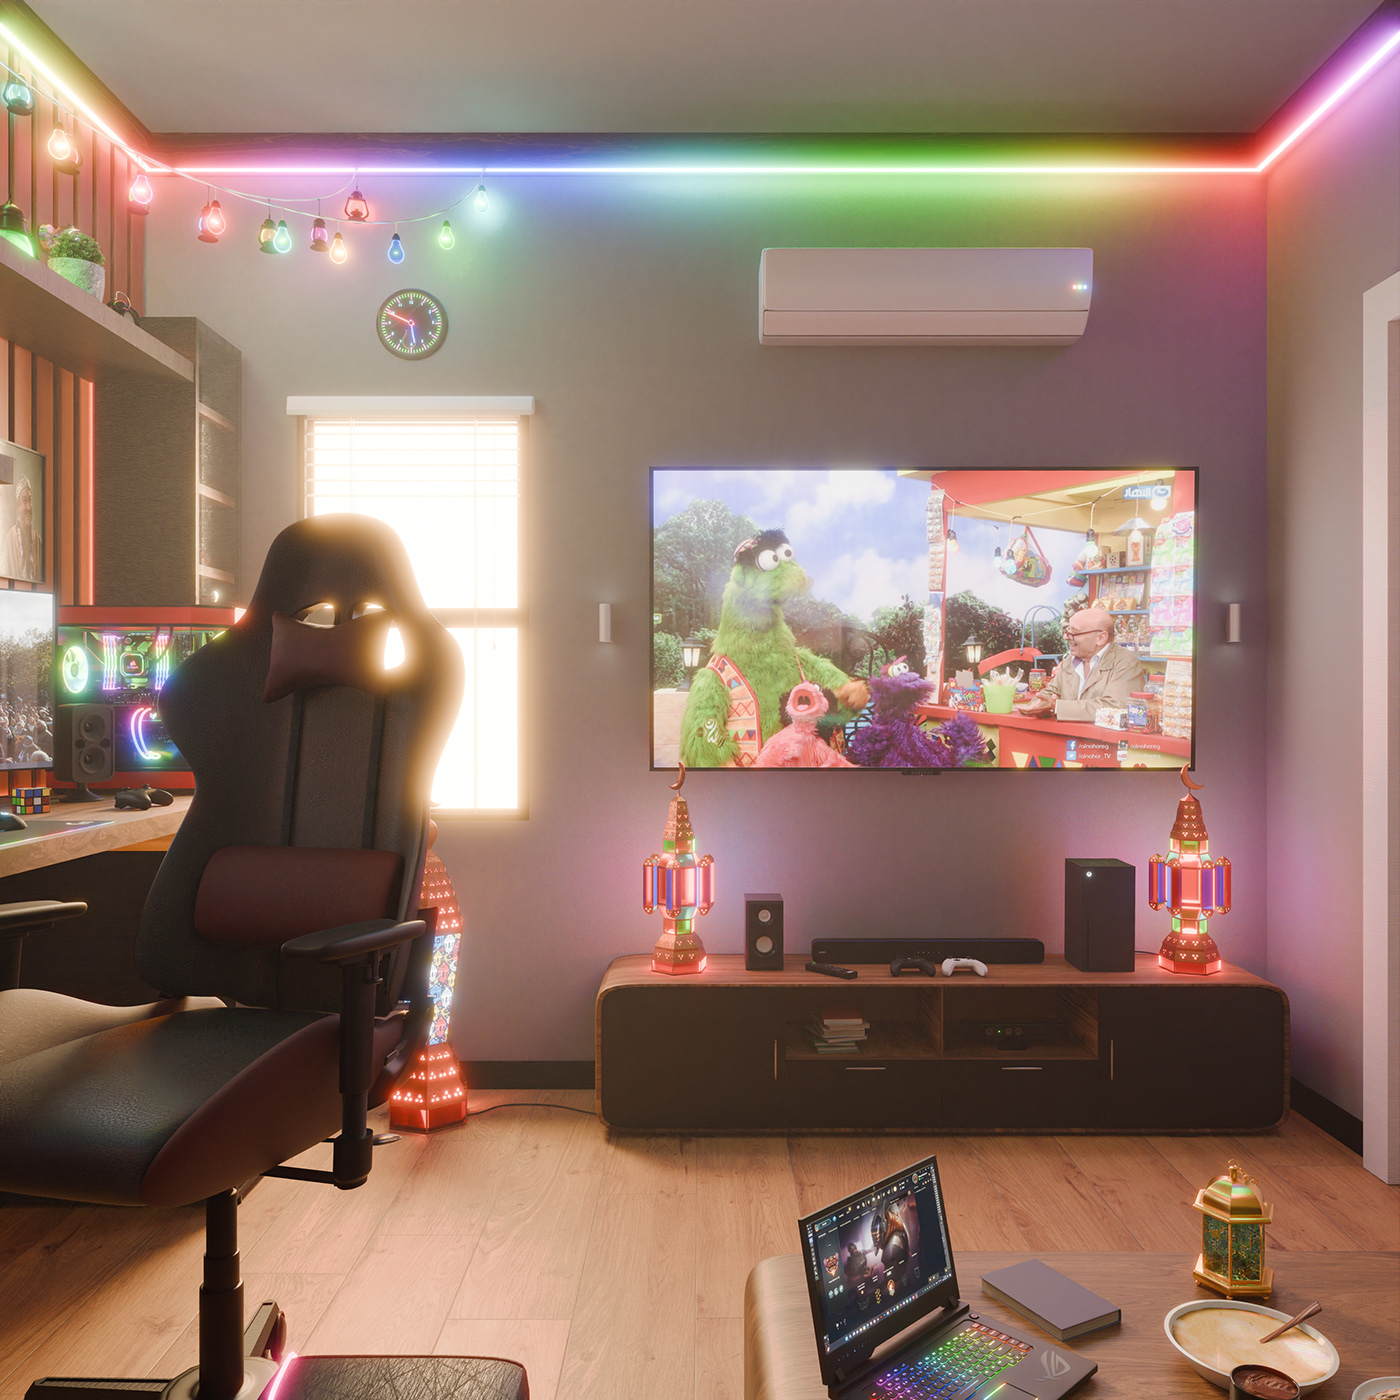 Gaming Gaming room 3D Isometric art gaming setup architecture interior design  blender cycles